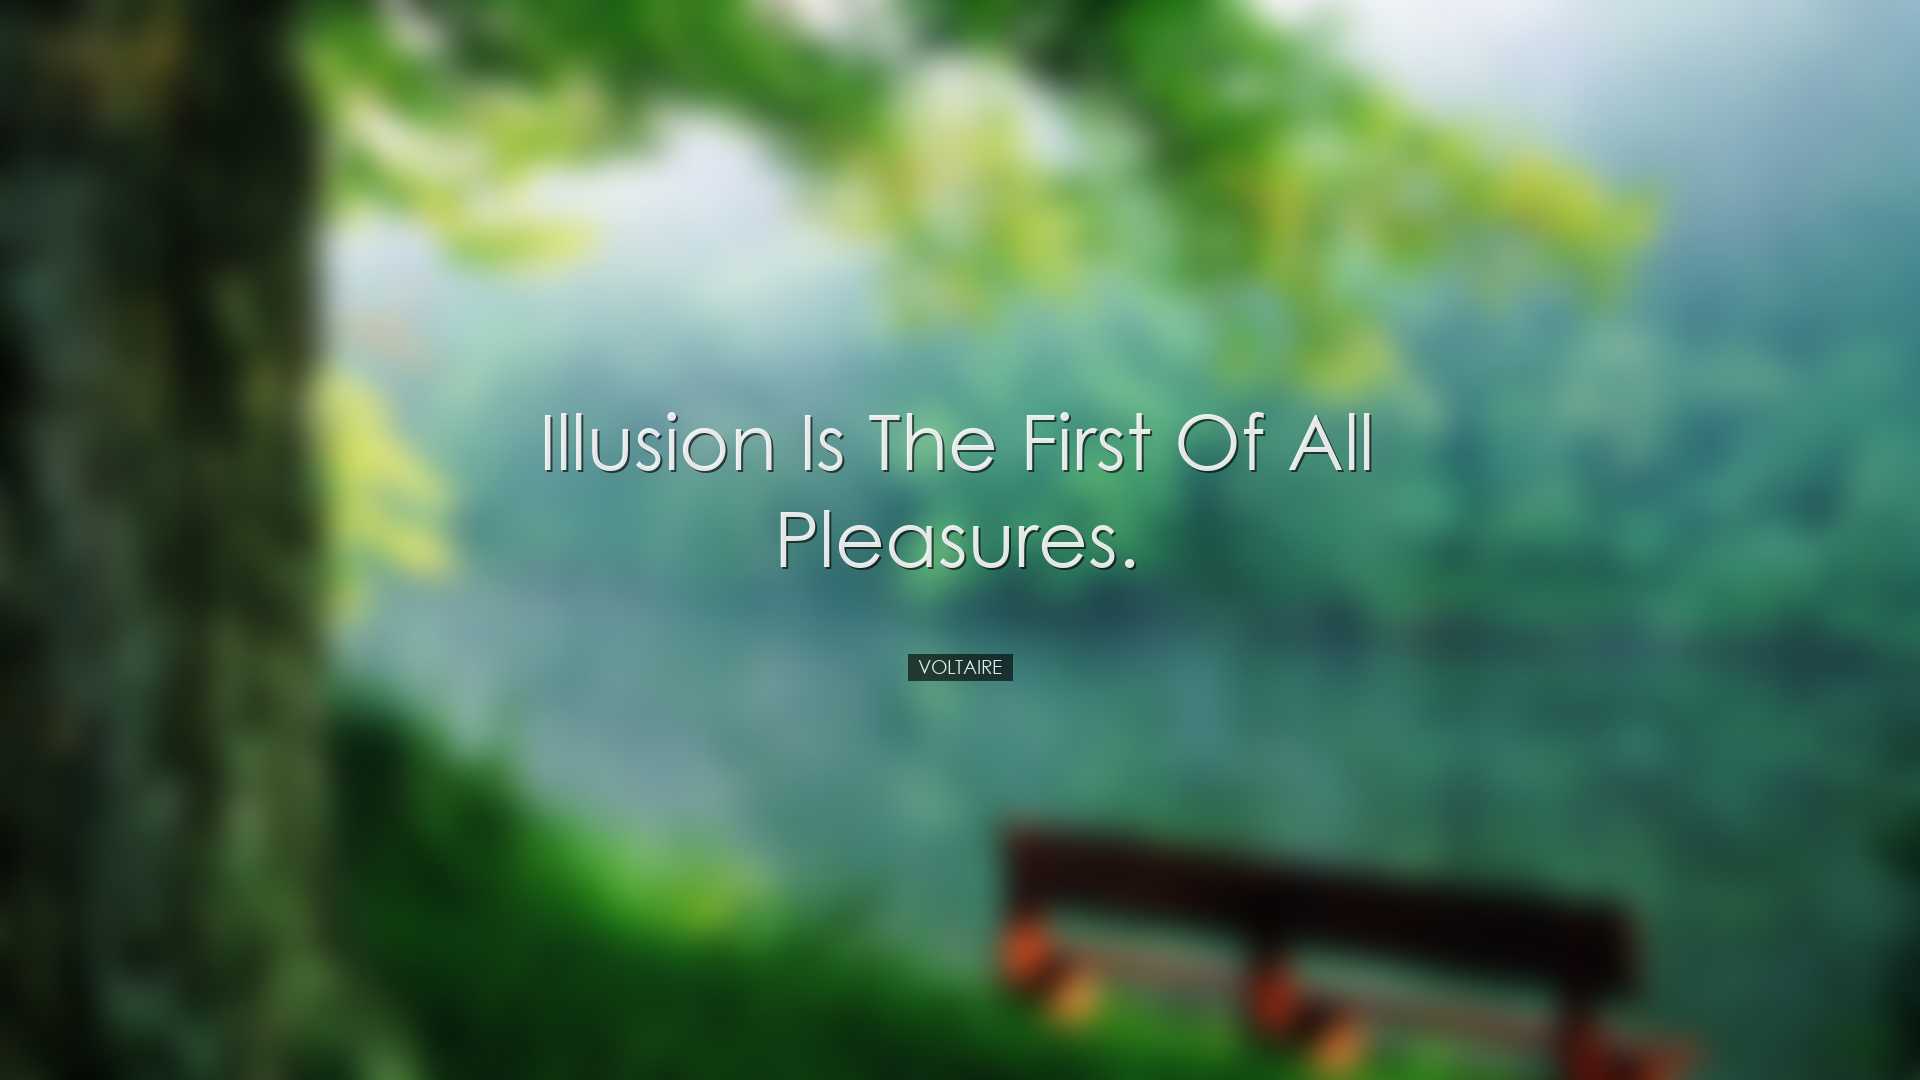 Illusion is the first of all pleasures. - Voltaire